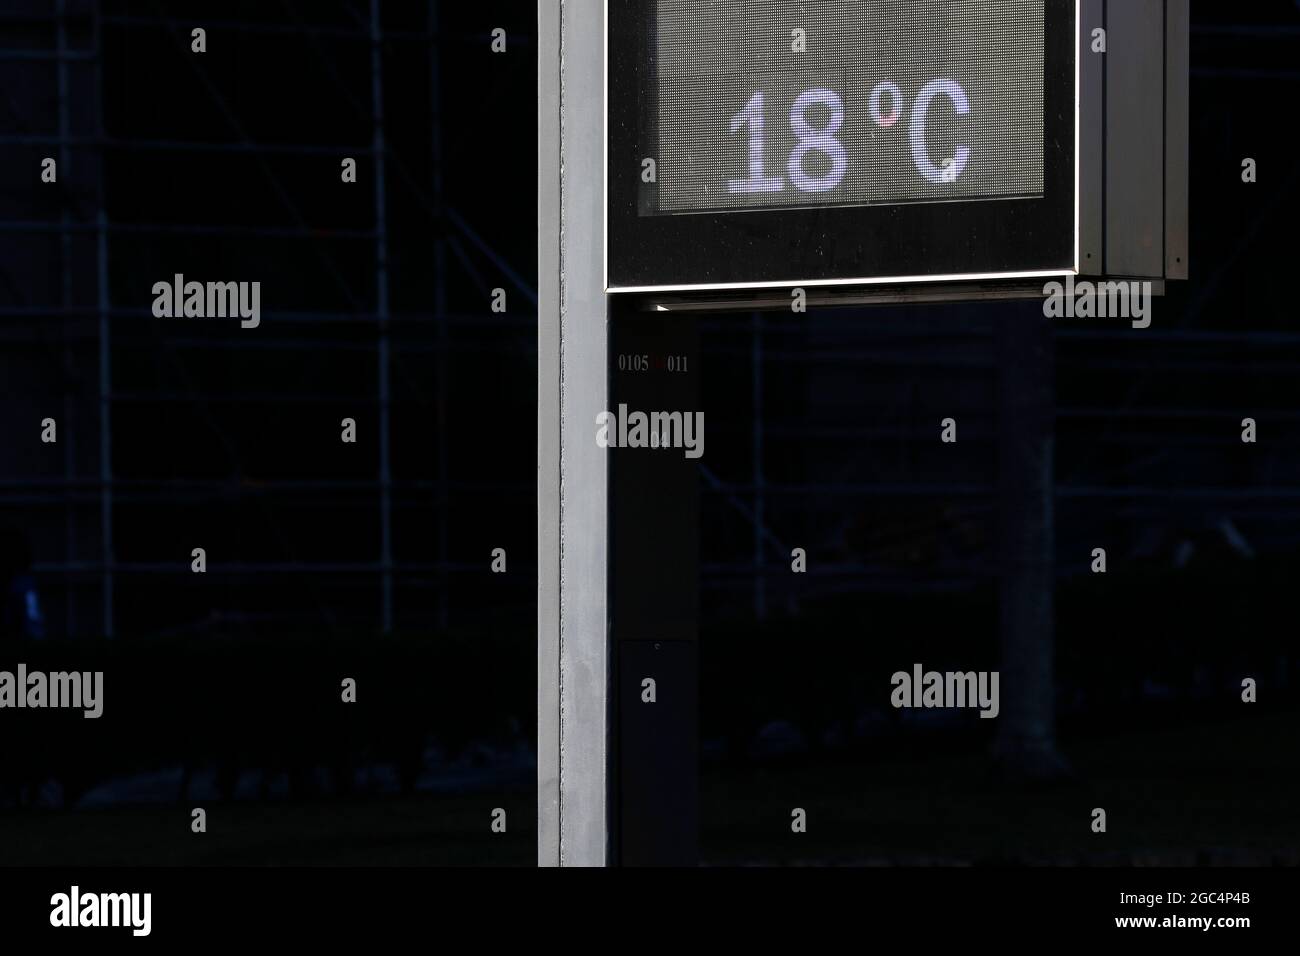 Temperature thermometer on street displays digital celsius degrees. Meteorology and weather device, climate change, global warming indicator. Stock Photo